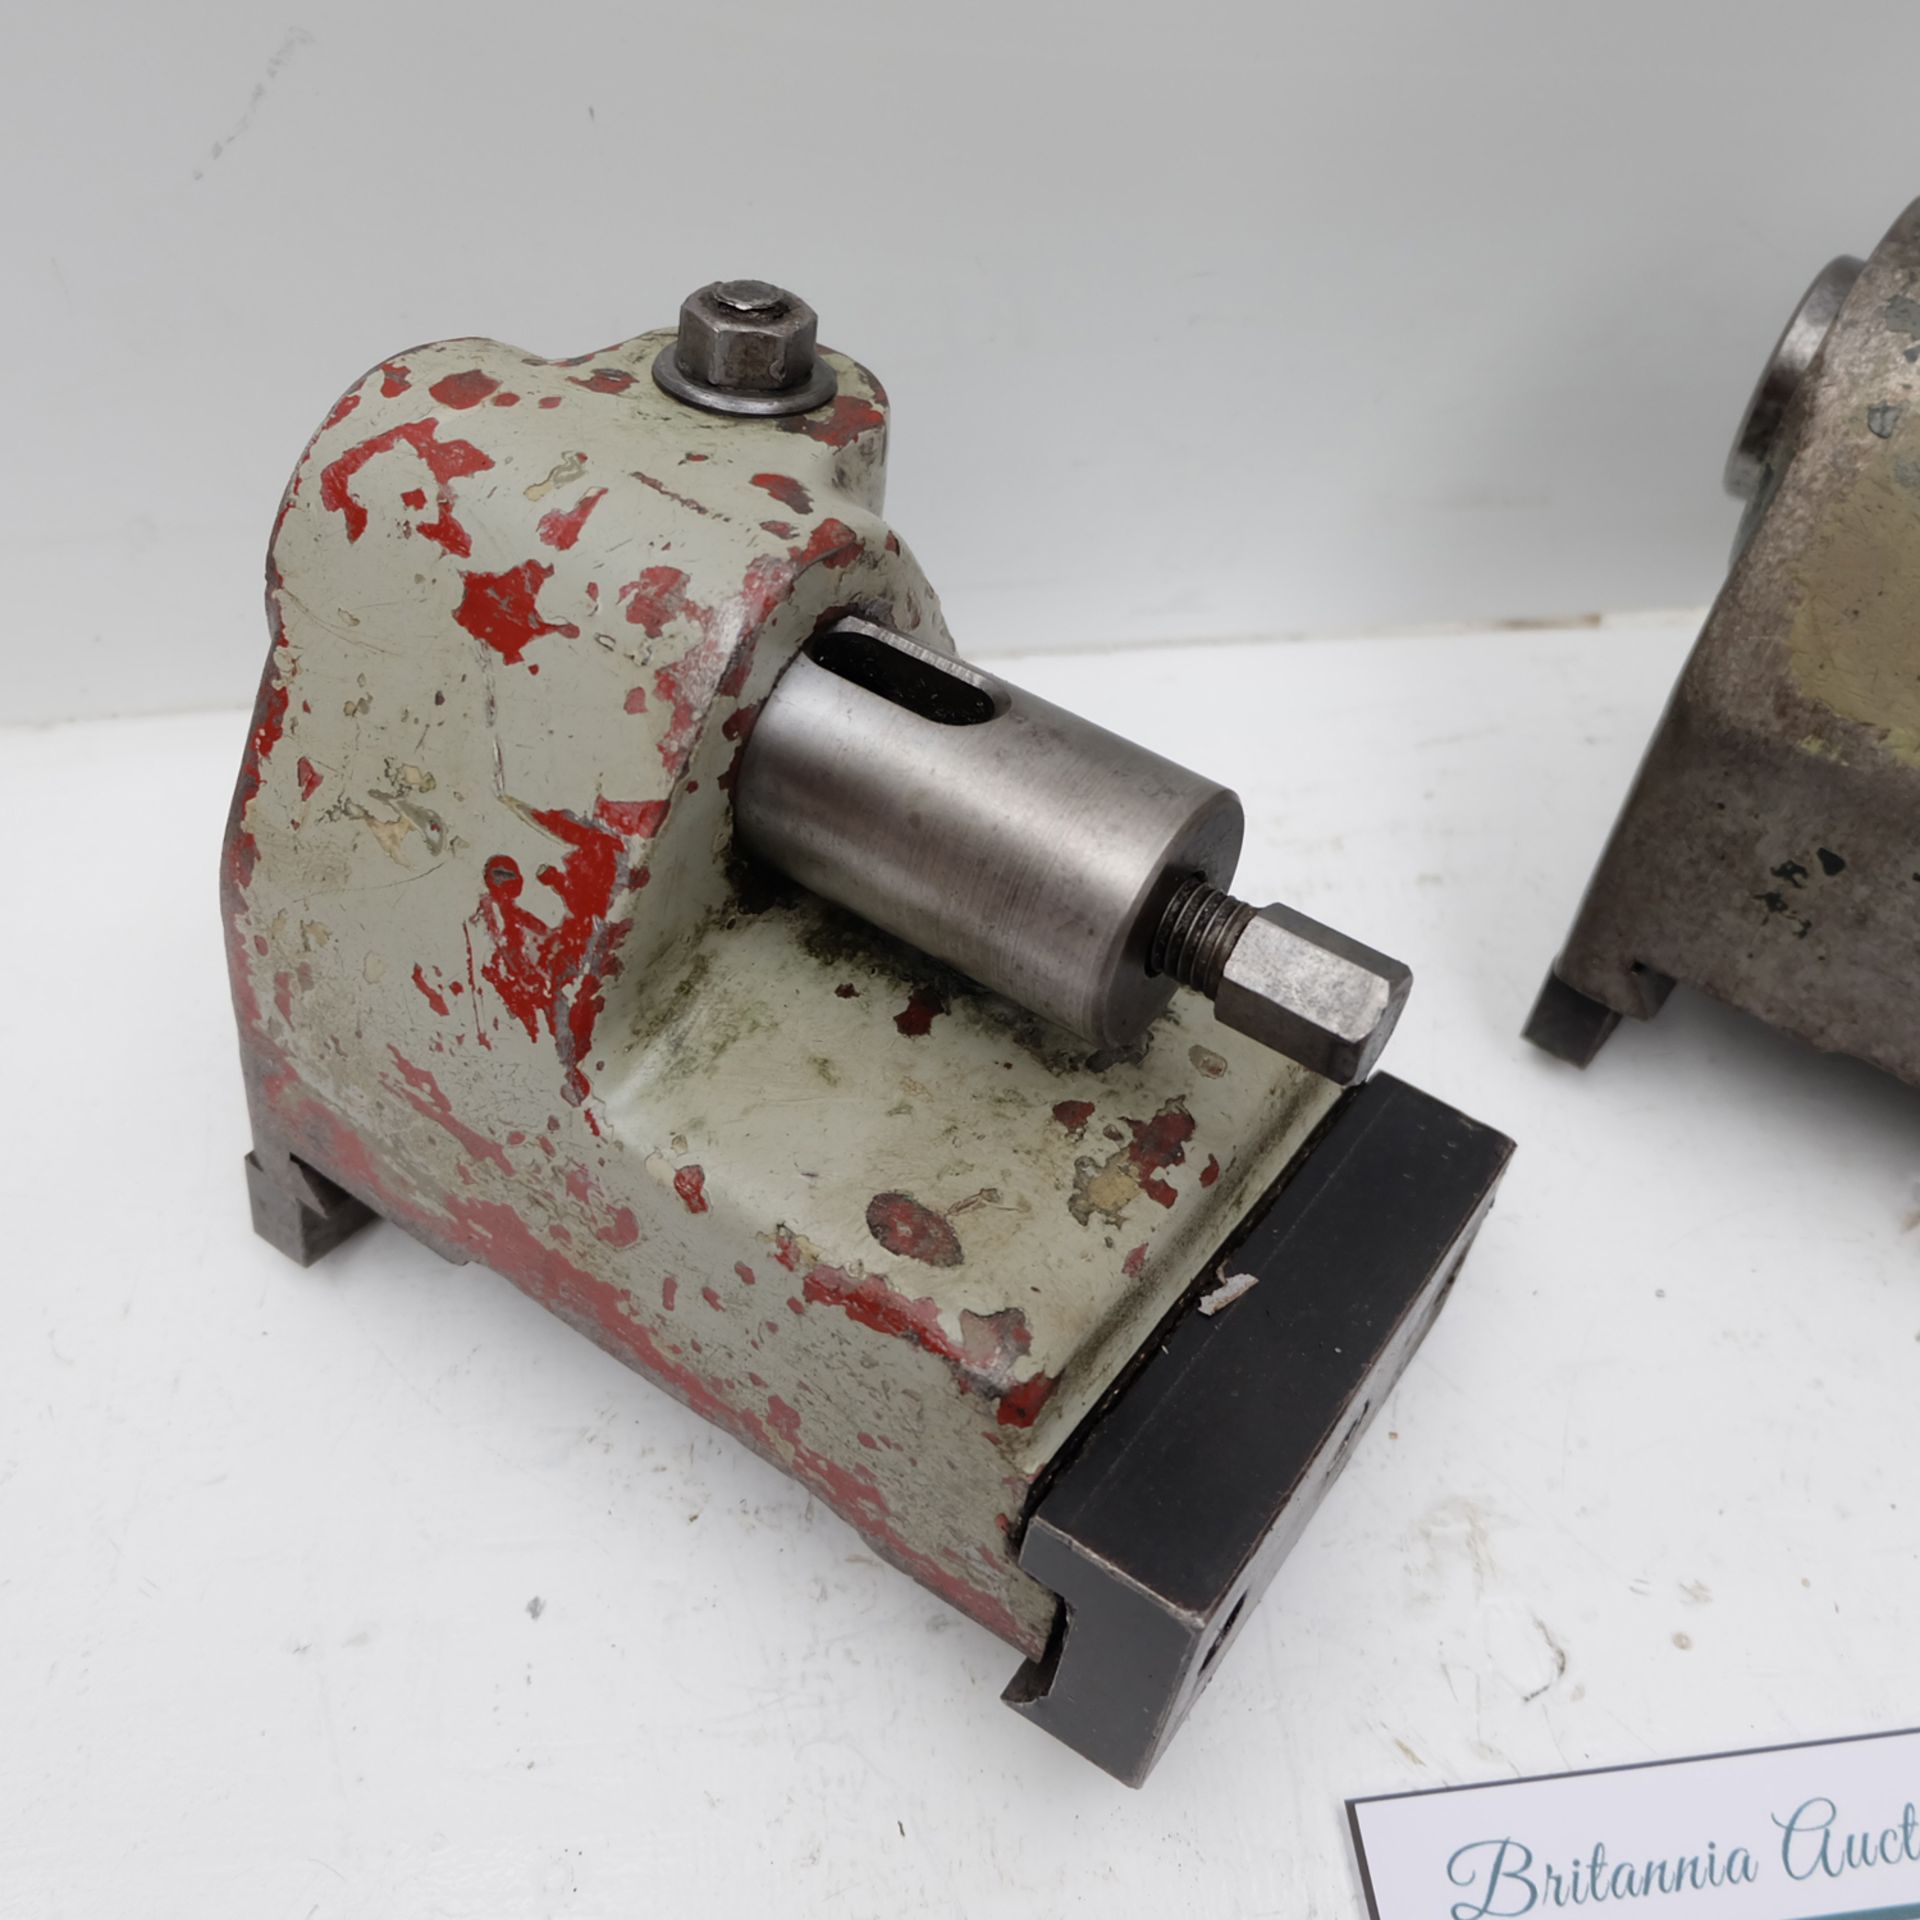 2 x Lathe Power Drilling Attachments. - Image 4 of 6